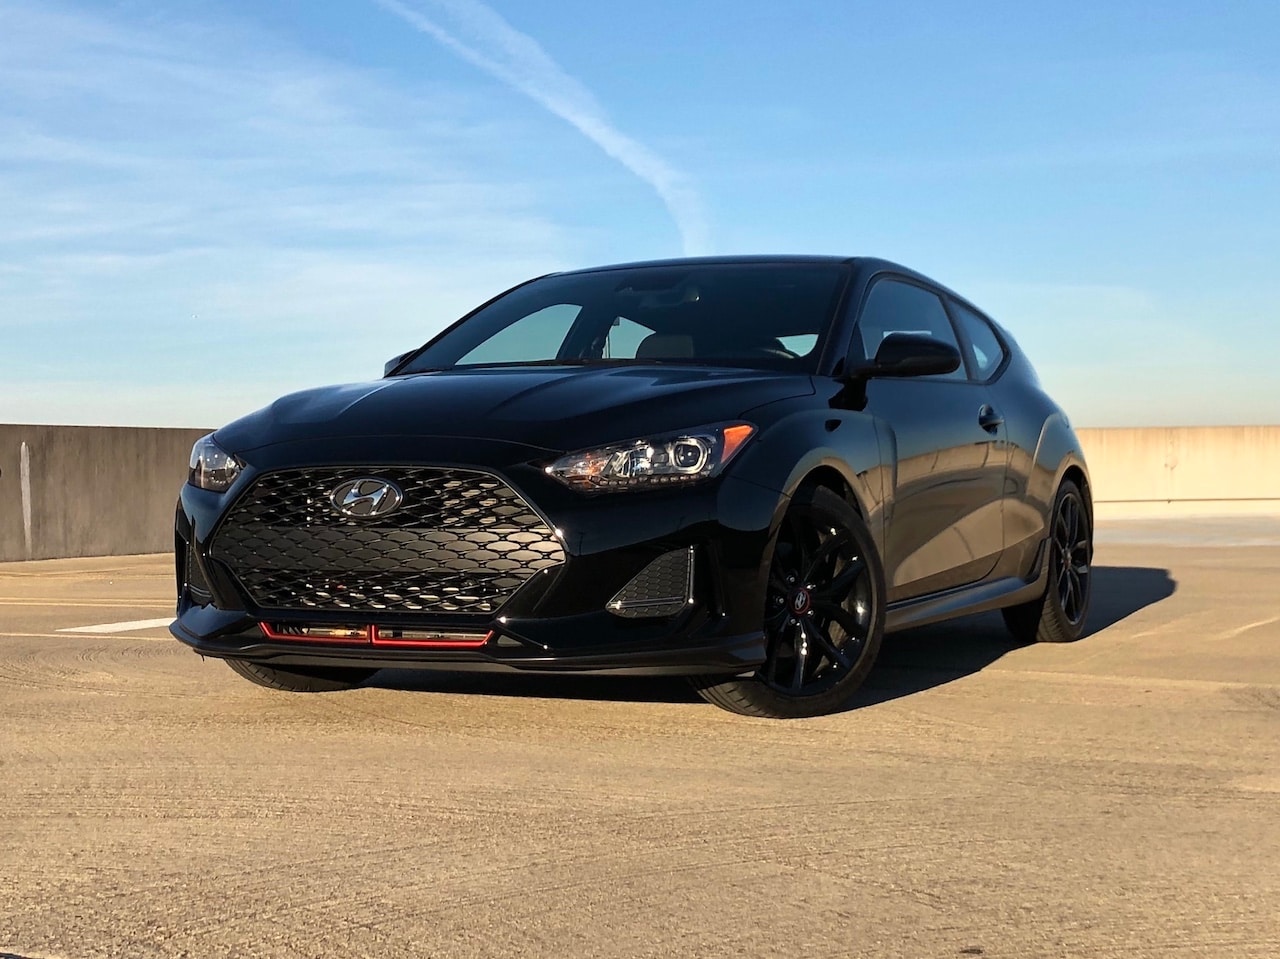 Stylish and Sporty: 2019 Hyundai Veloster Turbo R Spec Test Drive Review |  AutoNation Drive